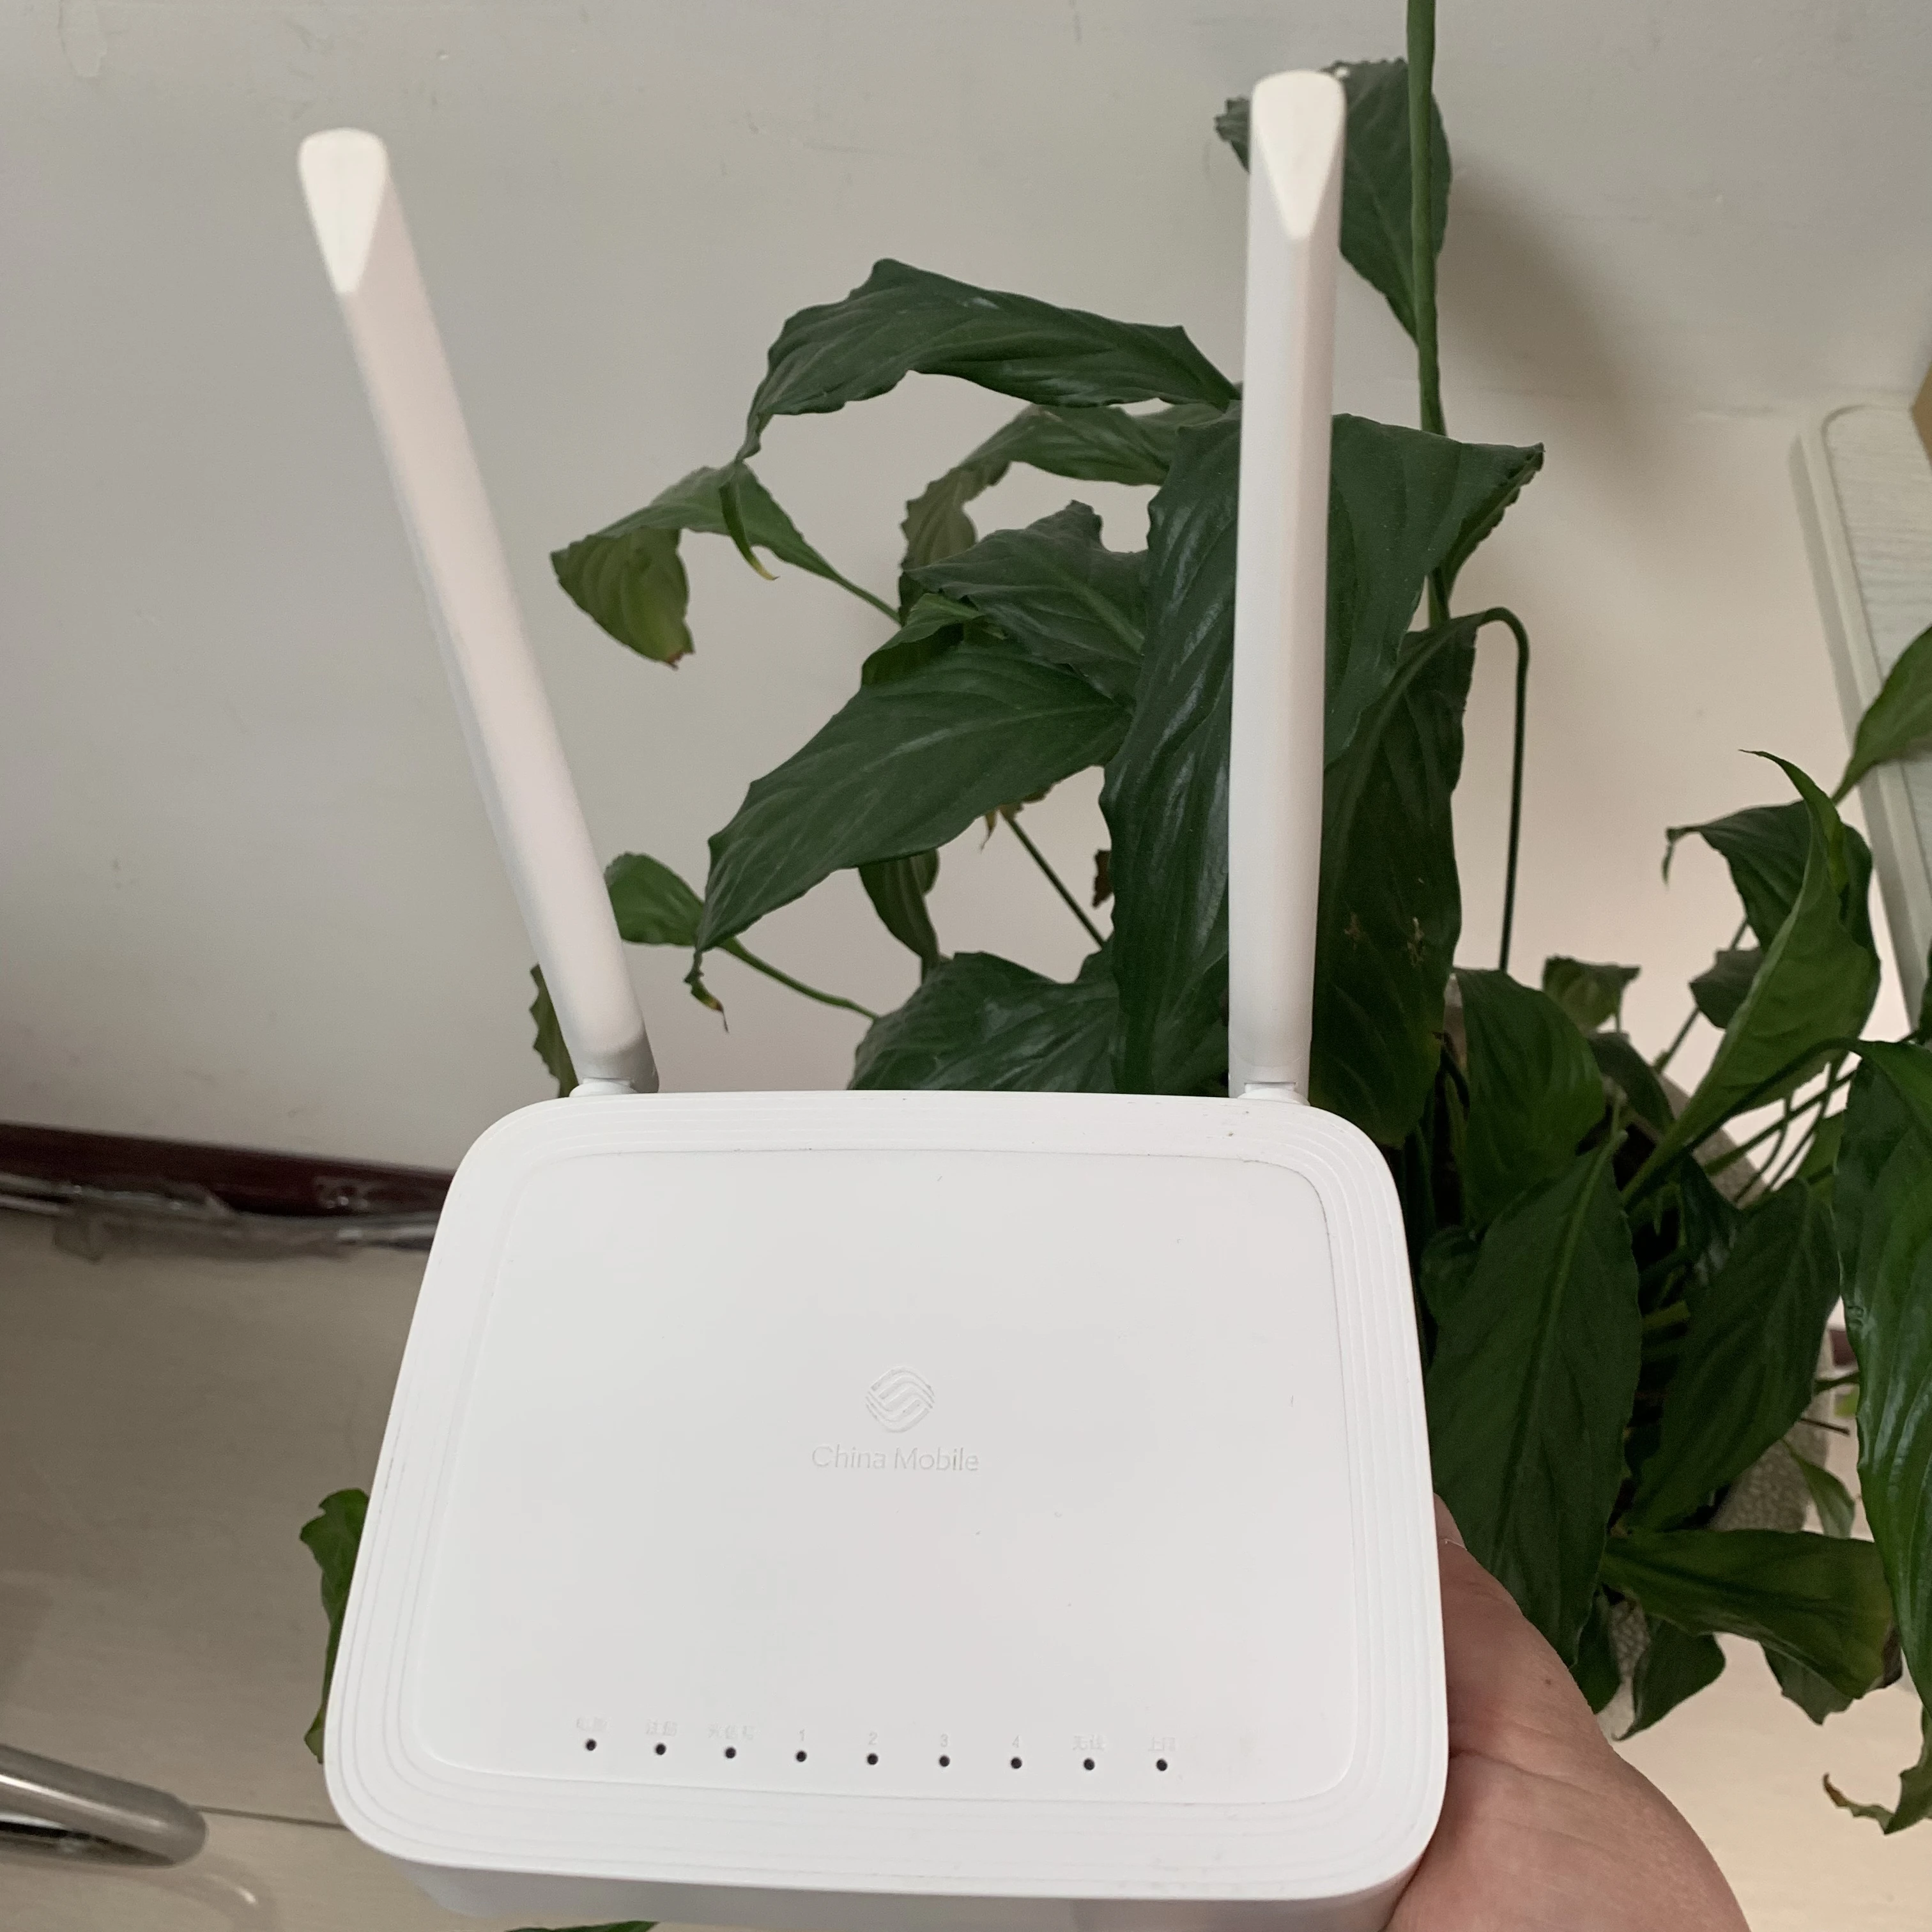 5G ONU GPON ONT GPON 4GE +2USB +2.4/5G WIFI AC Router Dual Band FTTH Modem Fiber Optic Second Hand Without Power